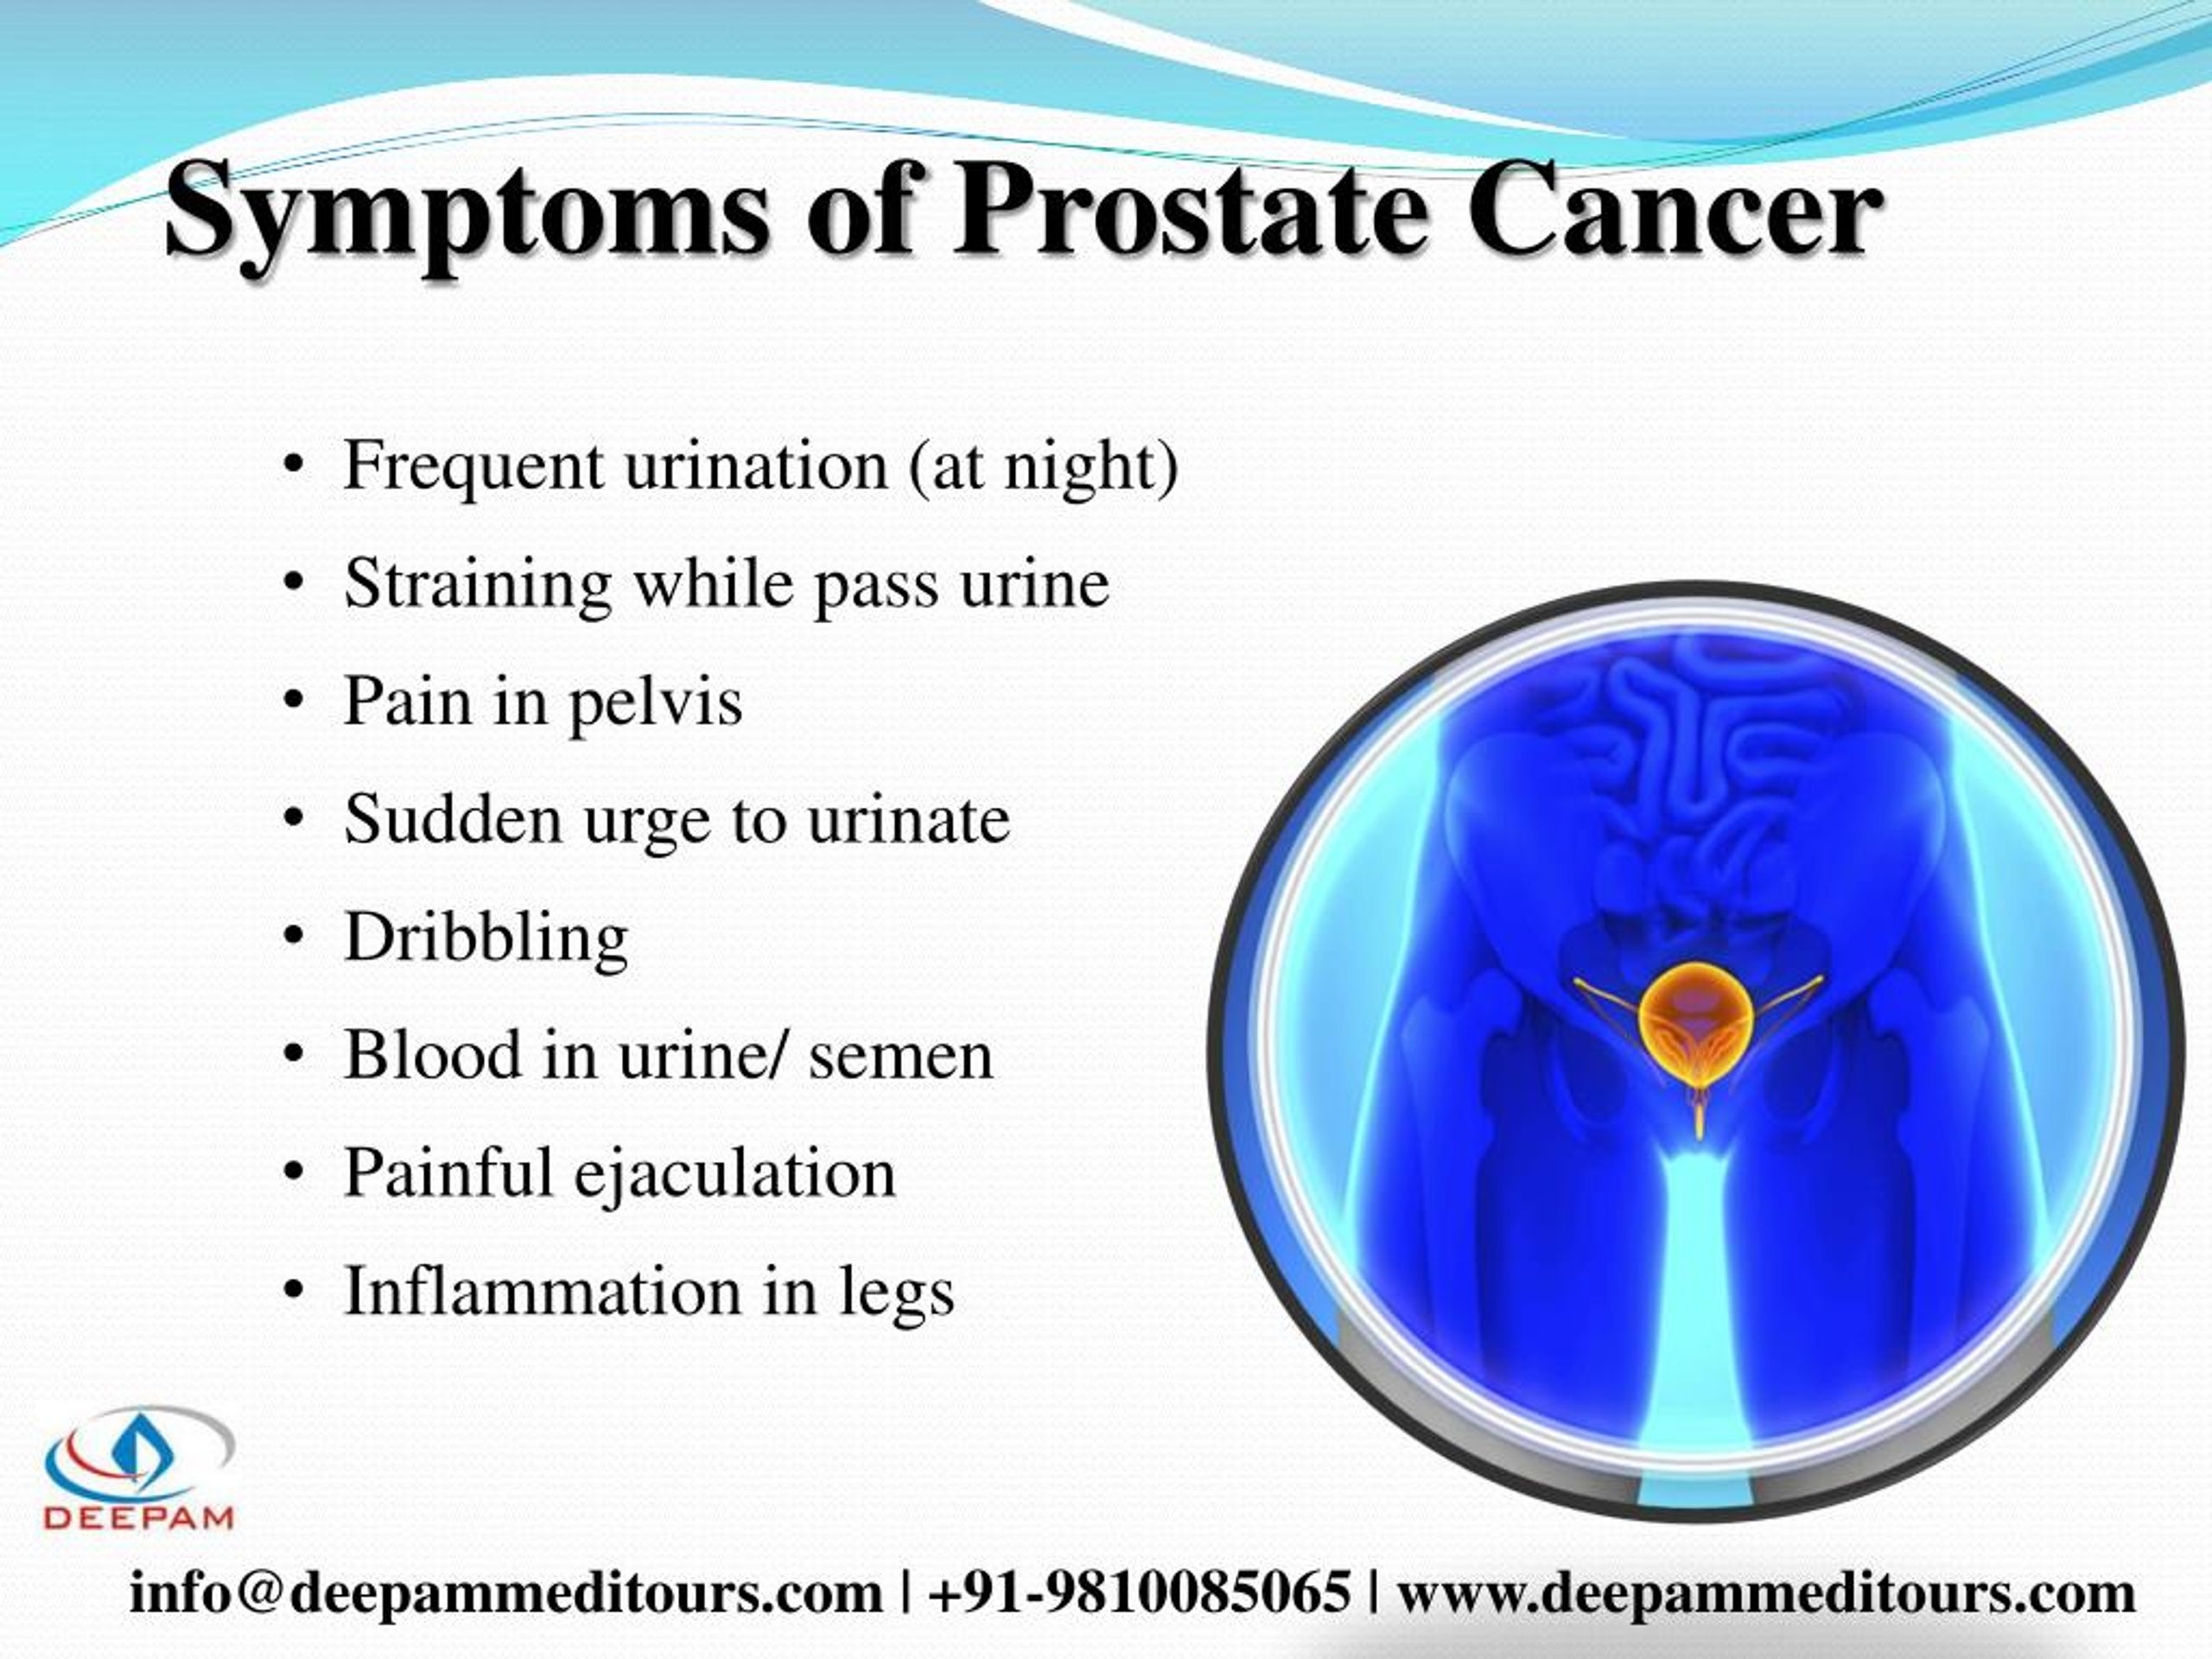 How often should you ejaculate to prevent prostate cancer